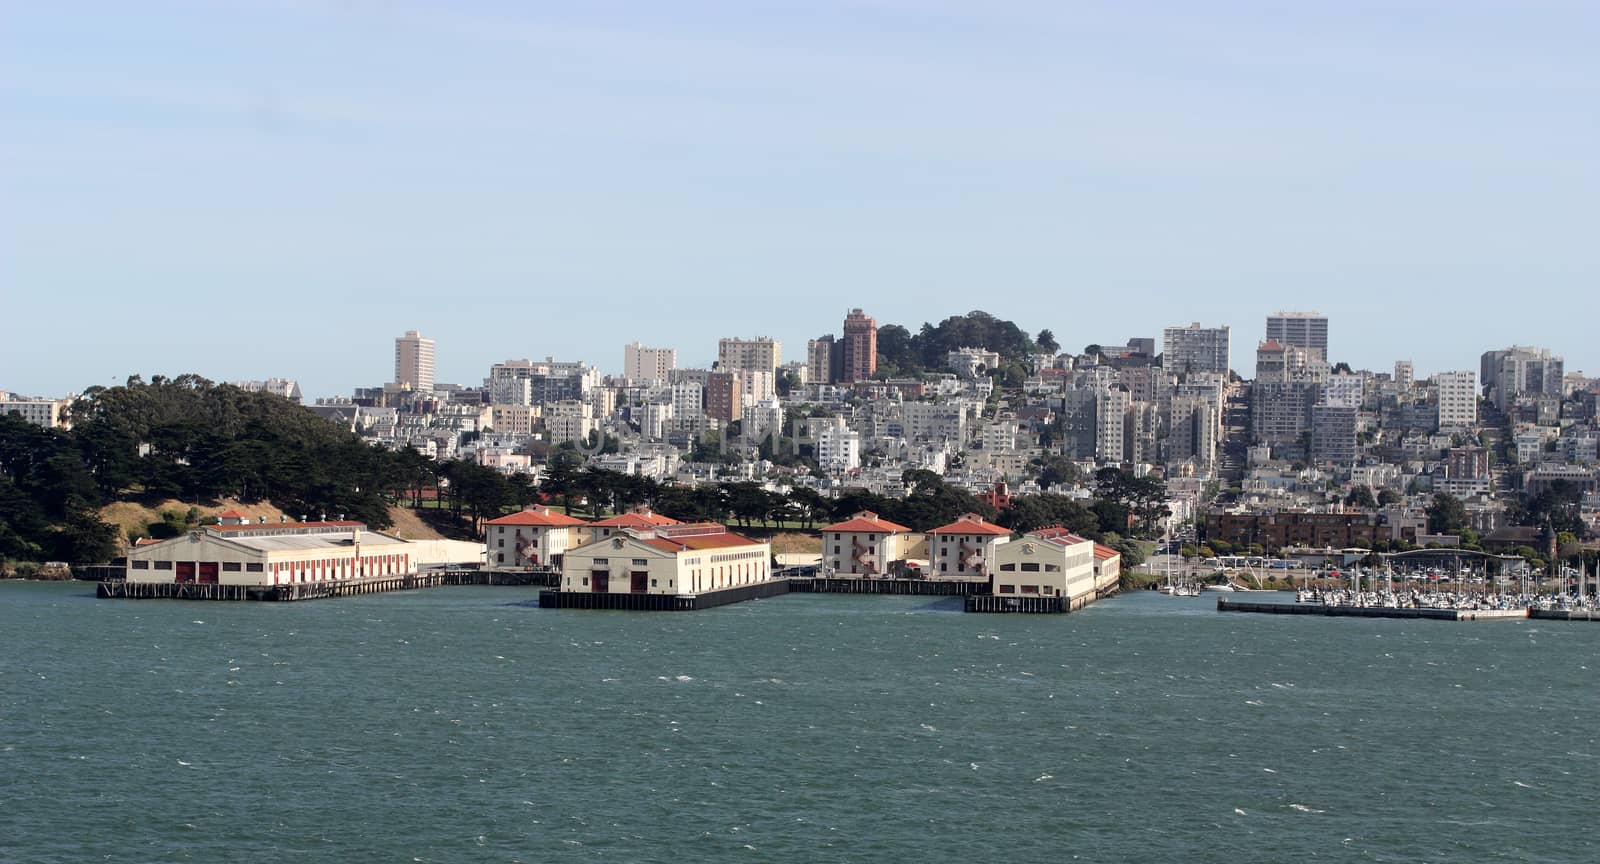 Scenic view of piers in San Francisco California